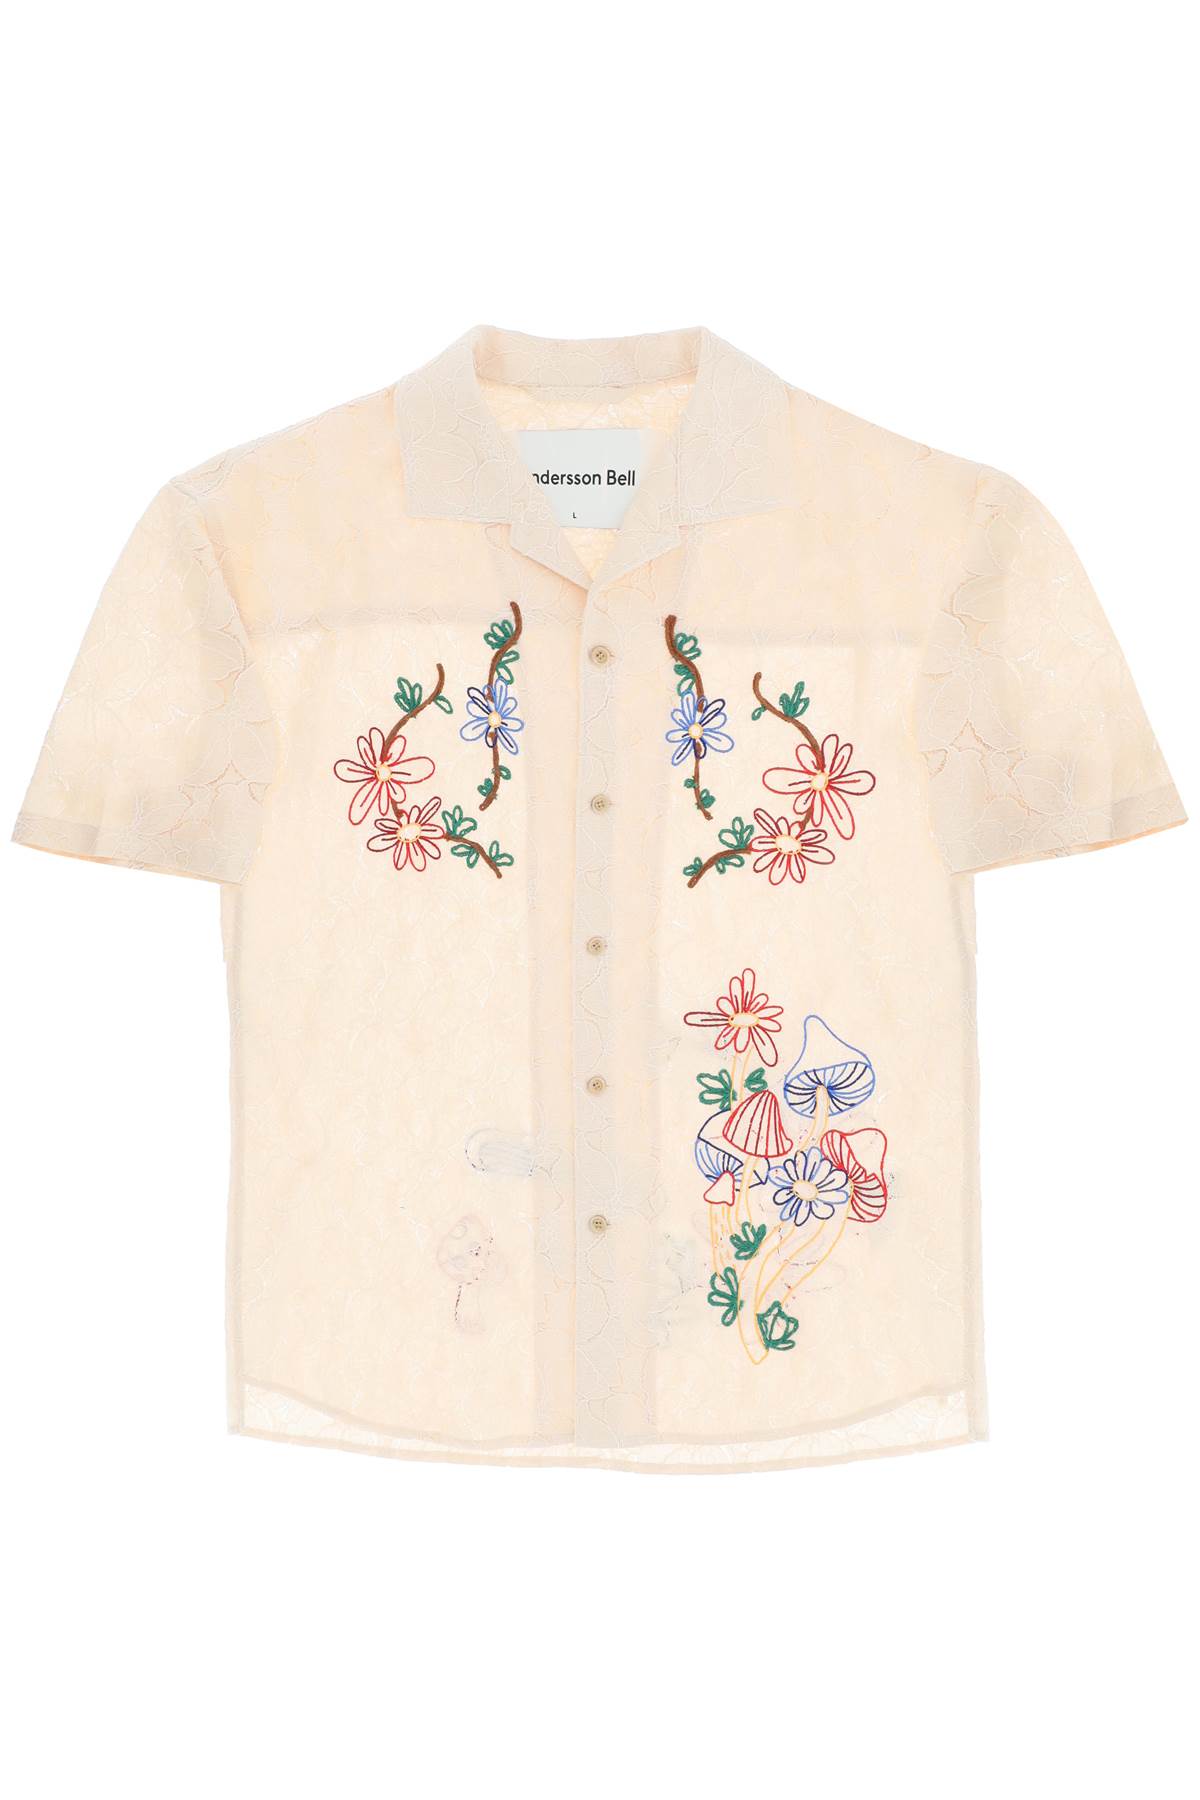 ANDERSSON BELL LACE SHIRT FEATURING EMBROIDERED FLOWERS AND MUSHROOMS